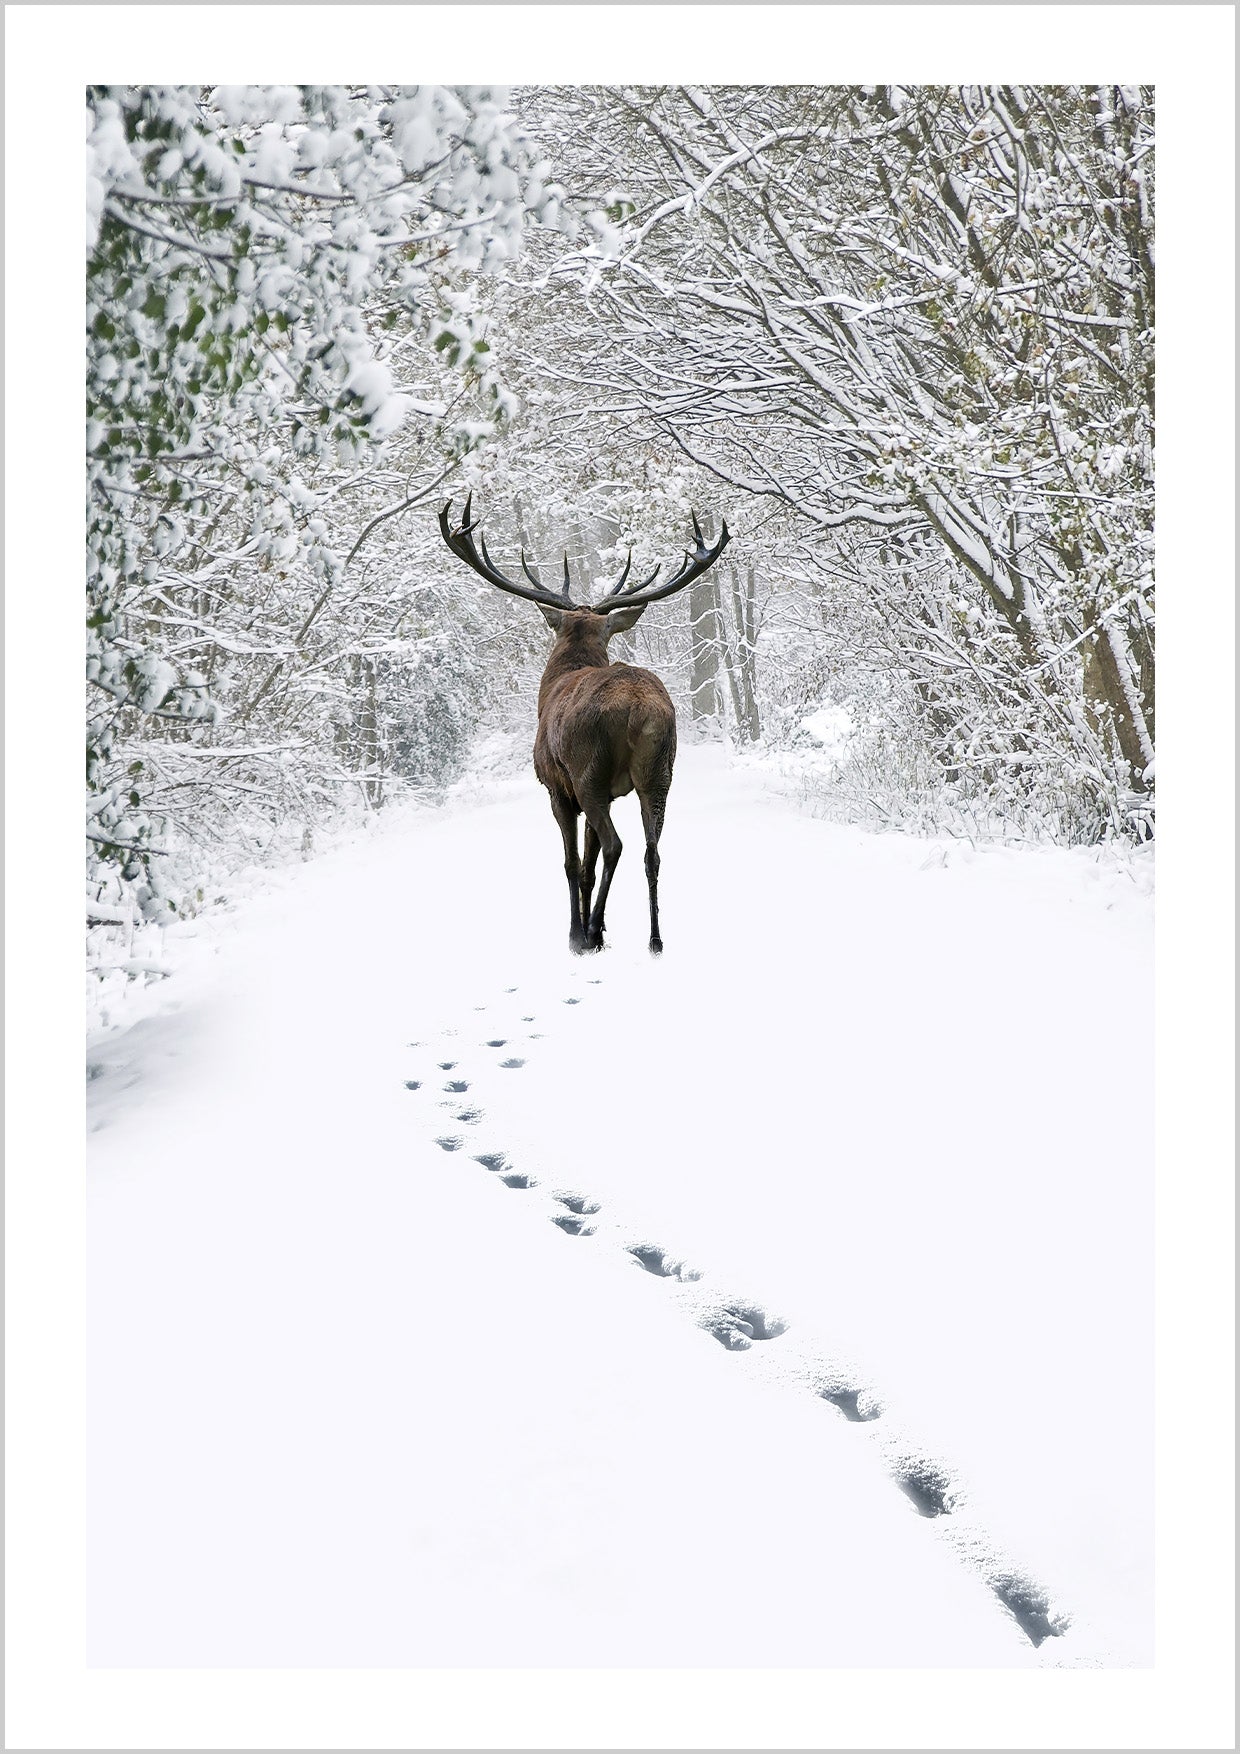 Deer in Snowy Forest Poster